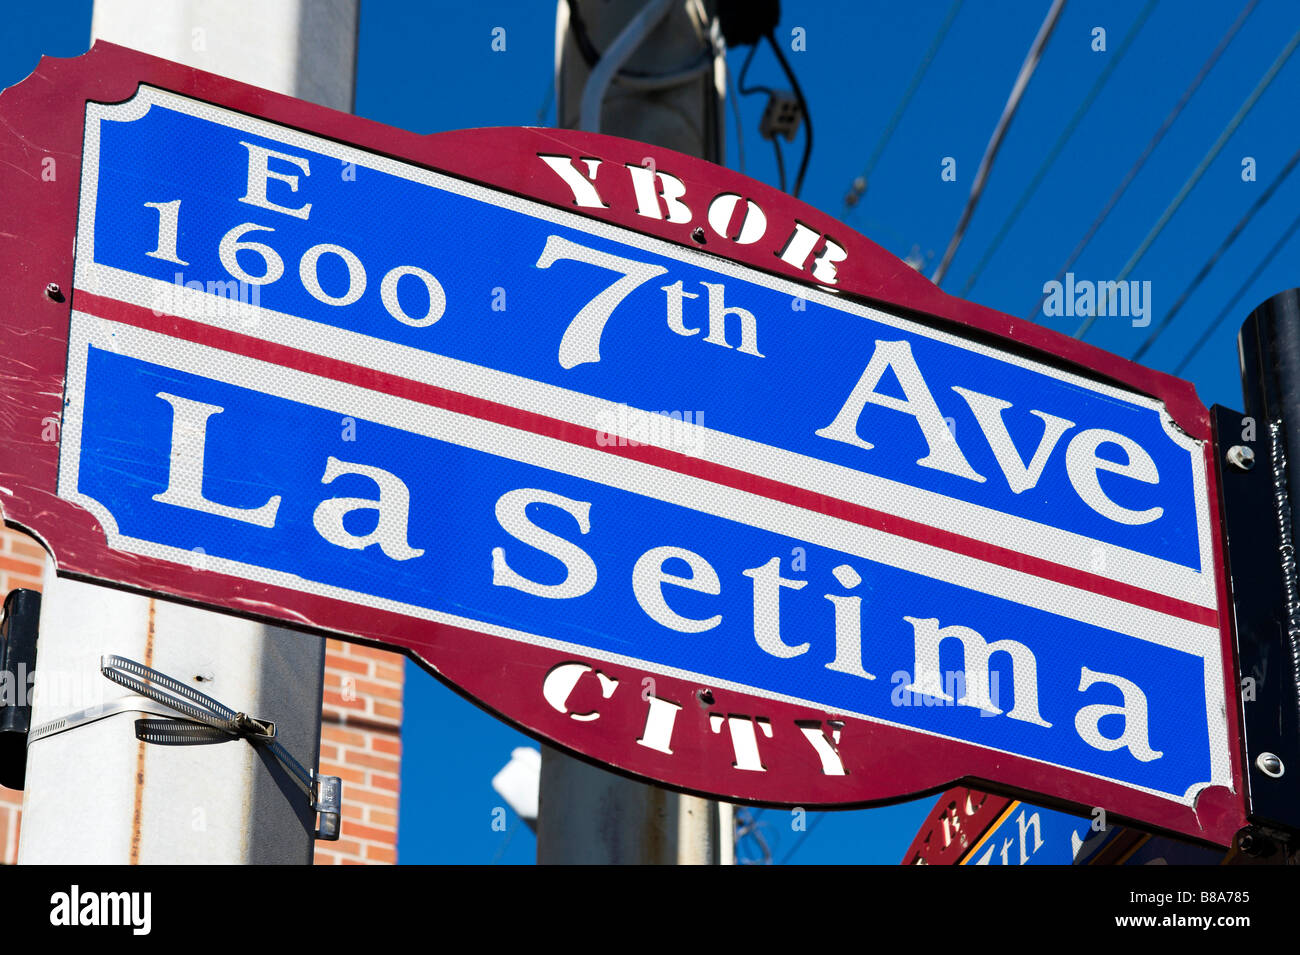 Street sign for 7th Avenue in the historic district of Ybor City, Tampa, Florida, USA Stock Photo